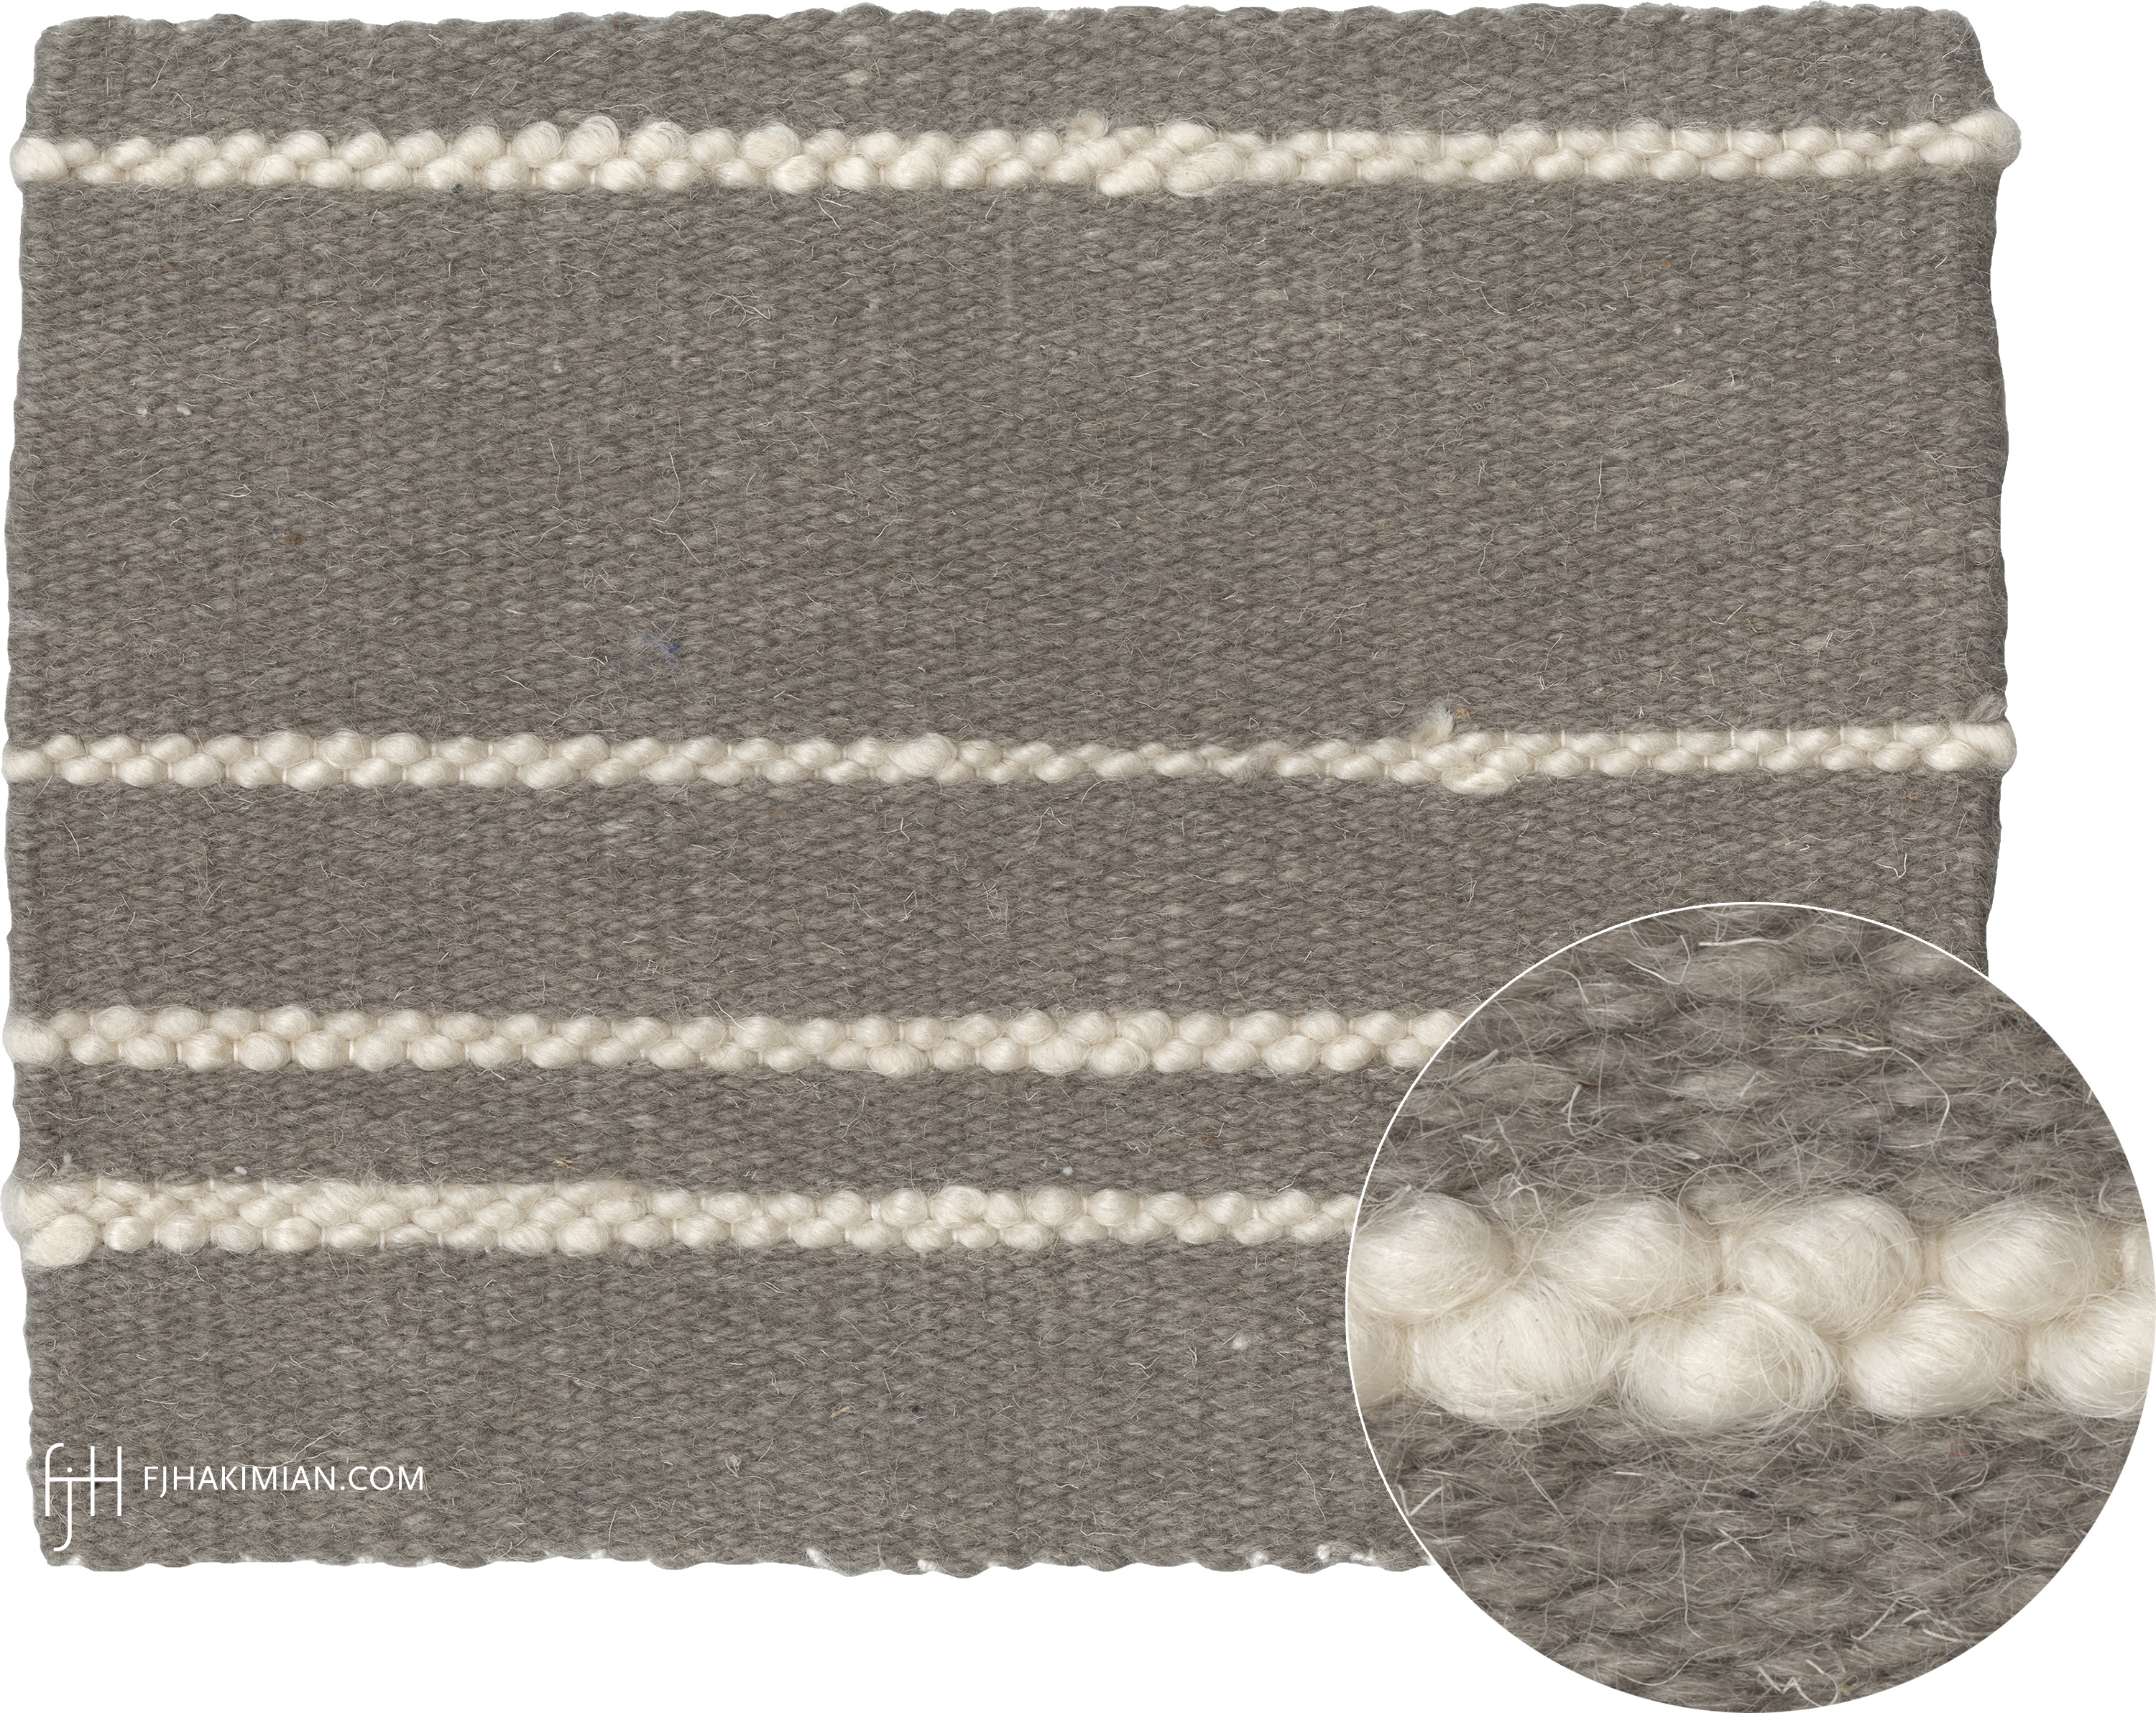 #57200-SW-Fine_Wool-GreyWool_with_WhiteMohairAccents-FJ_Hakimian